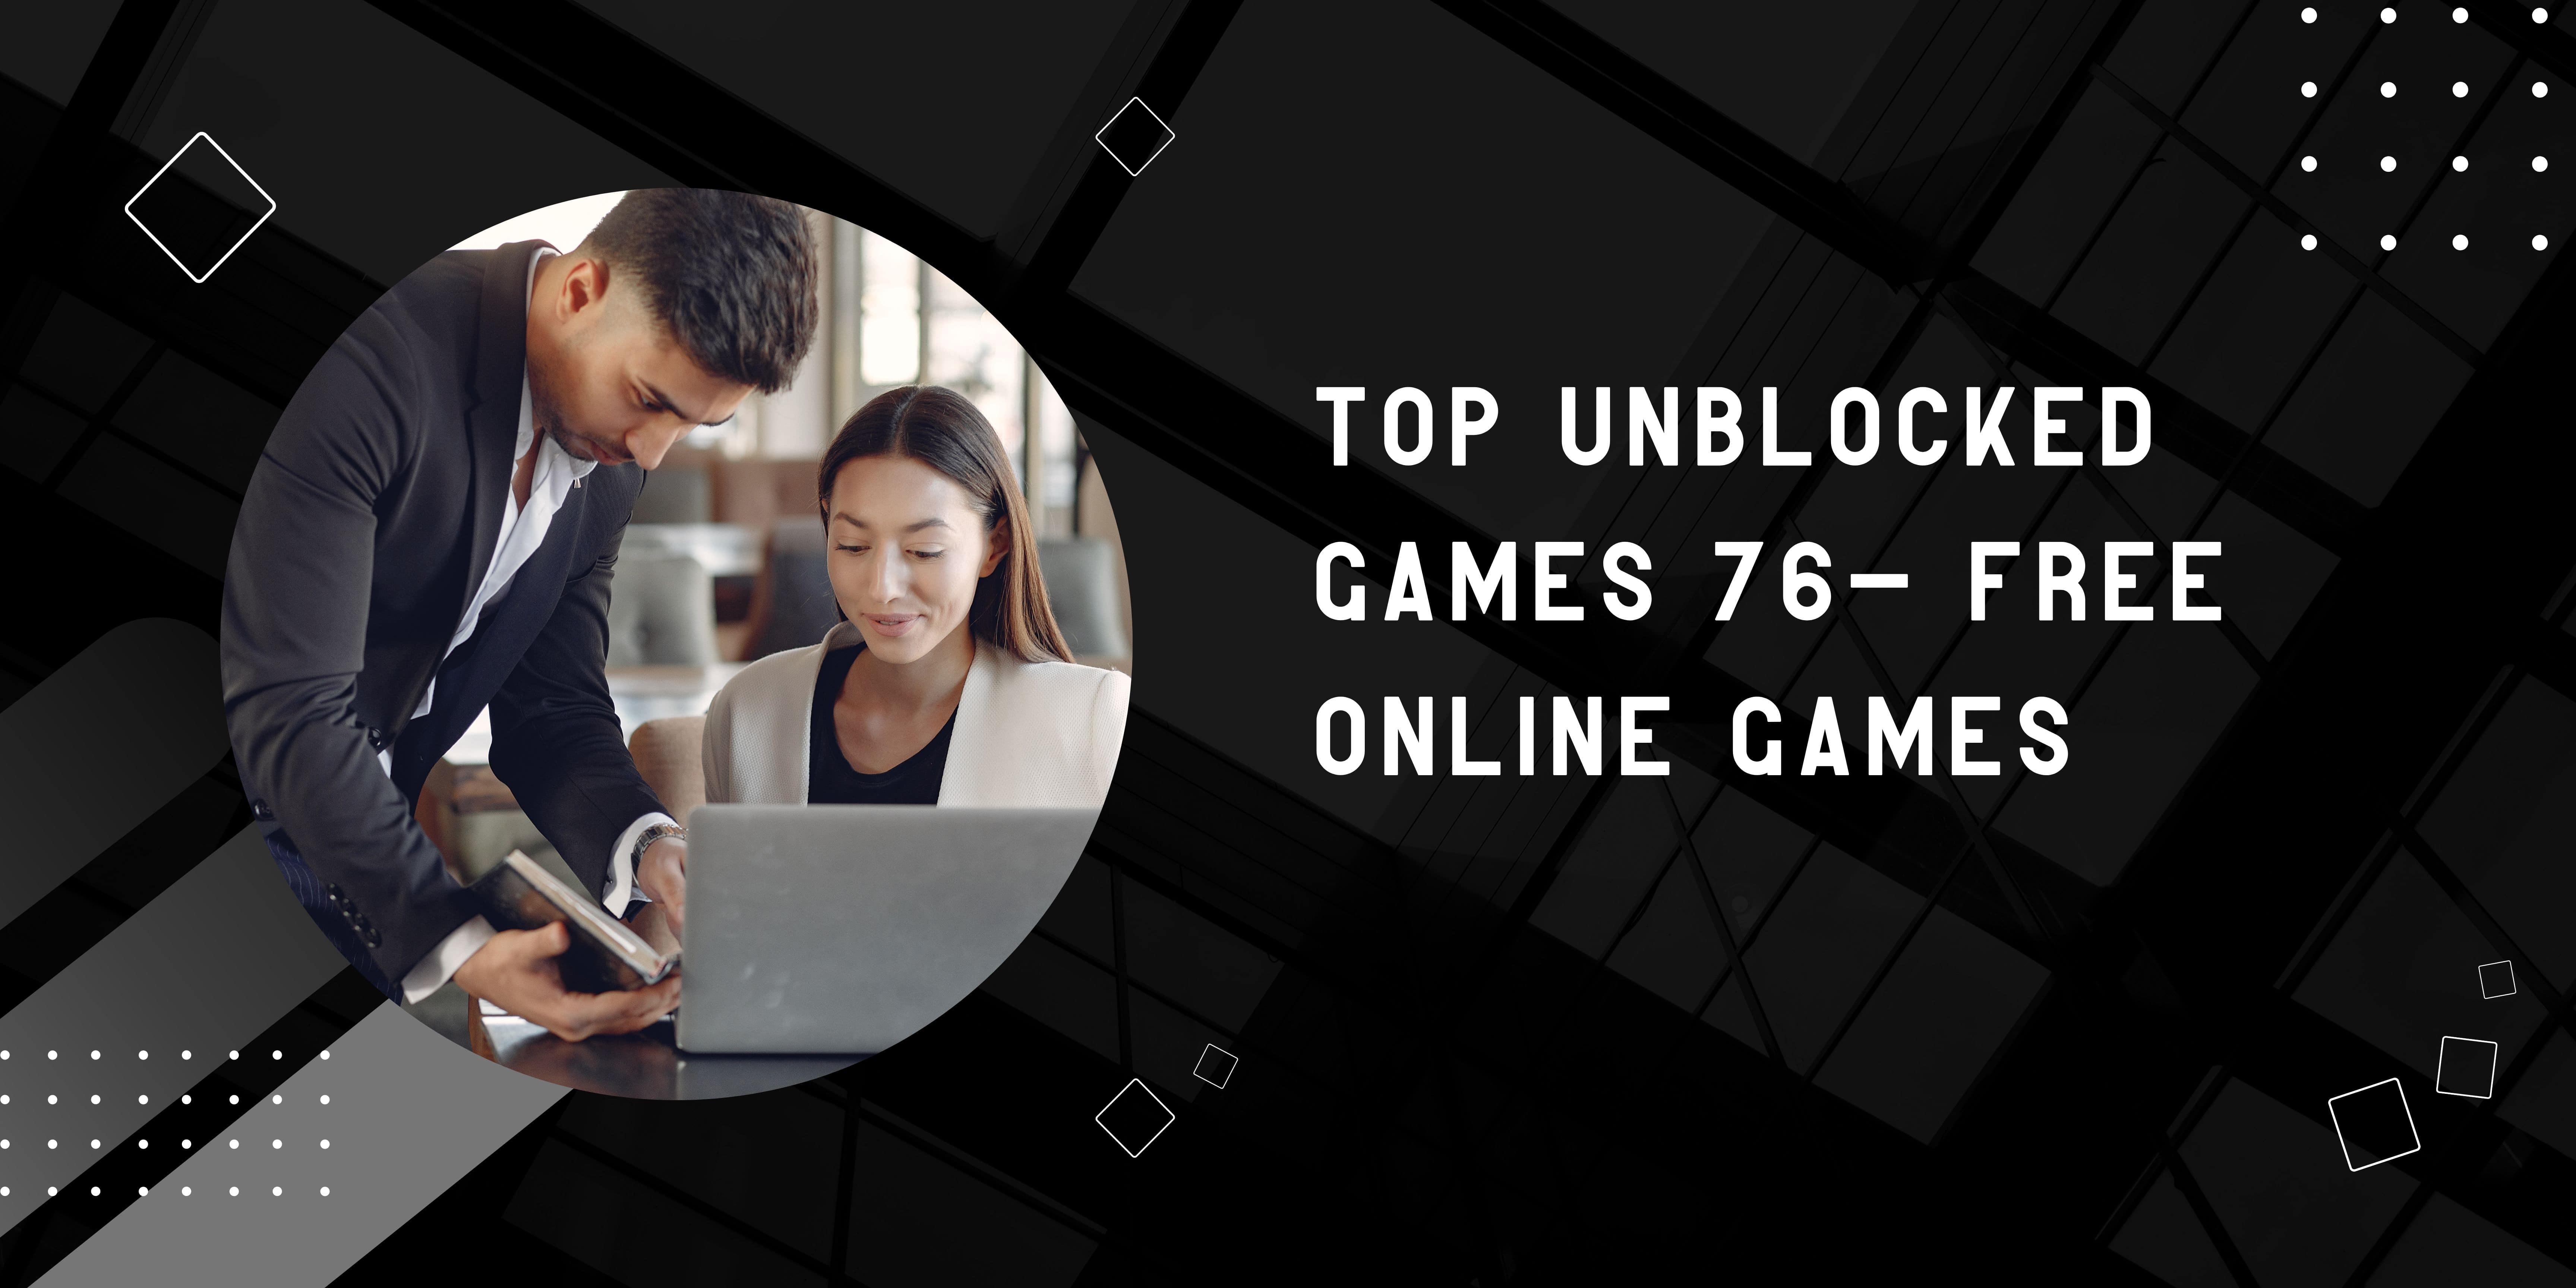 Top Unblocked Games 76 Free Online Games